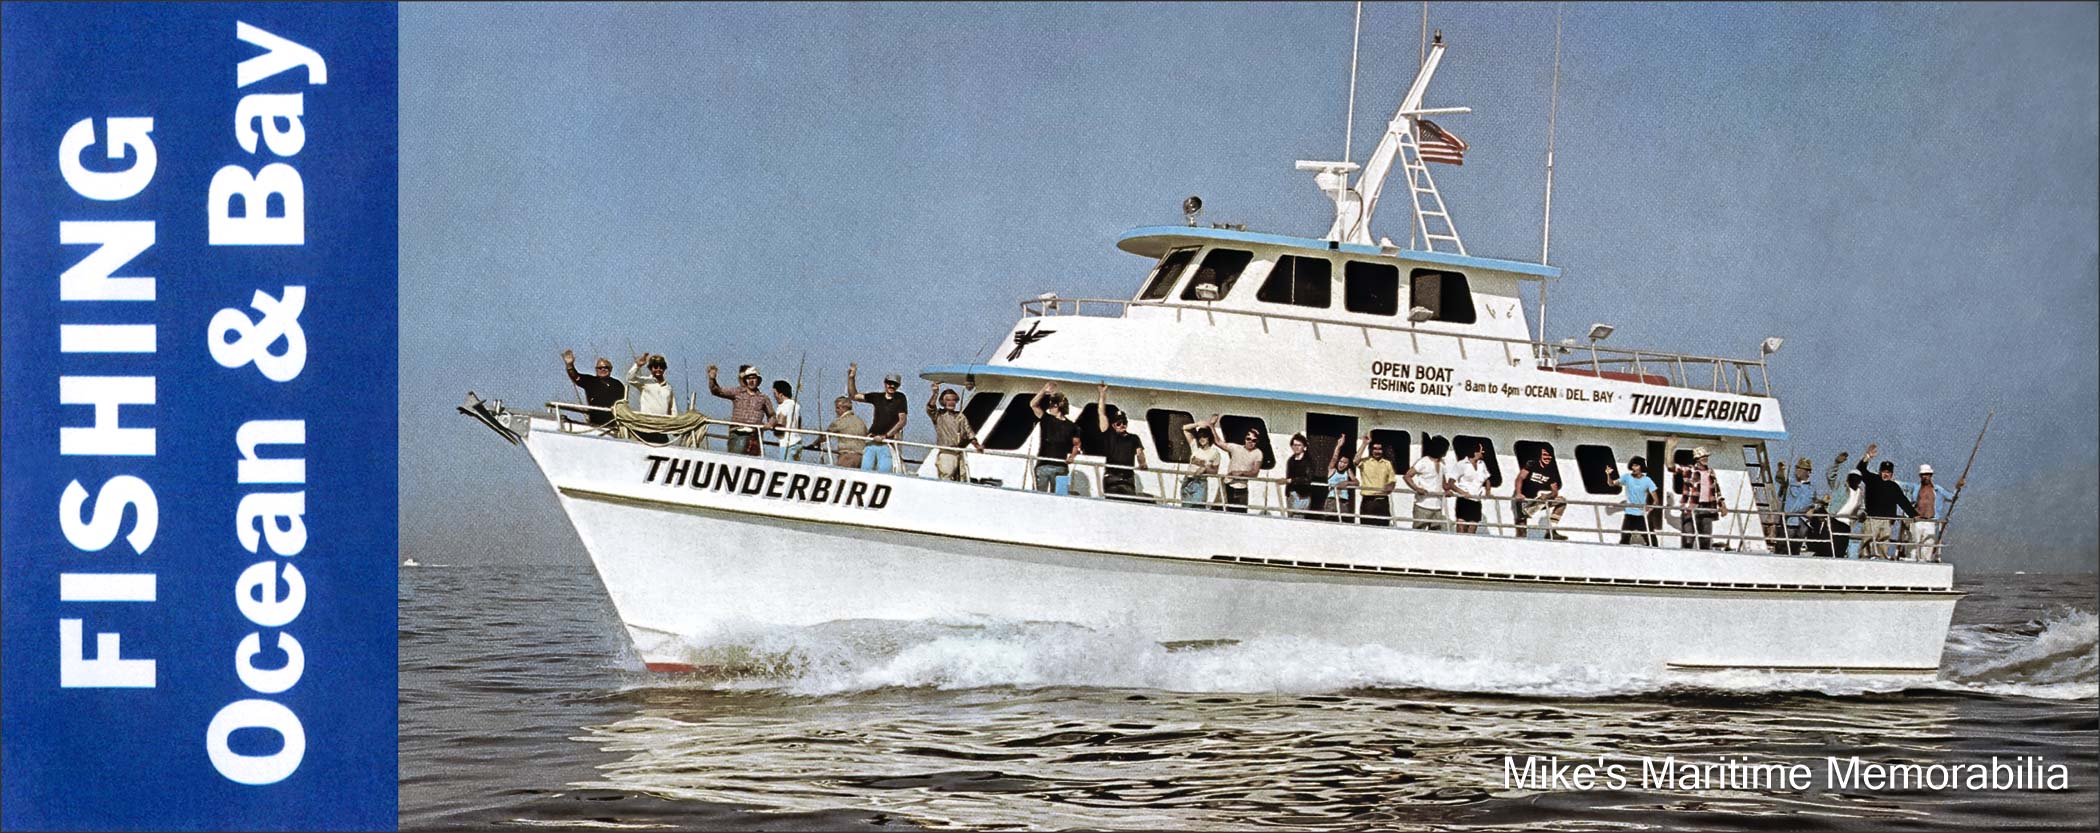 THUNDERBIRD, Cape May, NJ – 1979 A rack card for Captain Bob Hitchner's "THUNDERBIRD" from Cape May, NJ circa 1979. She sailed from Cape Island Marina. She was built in 1978 by Yank Boat Works at Tuckahoe, NJ. And she later sailed as the "YANKEE PRIDE II" from Gloucester, MA and then as the "SPEEDY EXPRESS" from Captree, NY. She is presently sailing as Captain James Schneider's "JAMES JOSEPH II" from Huntington, NY. The rack card is courtesy of Captain John Bogan Jr.